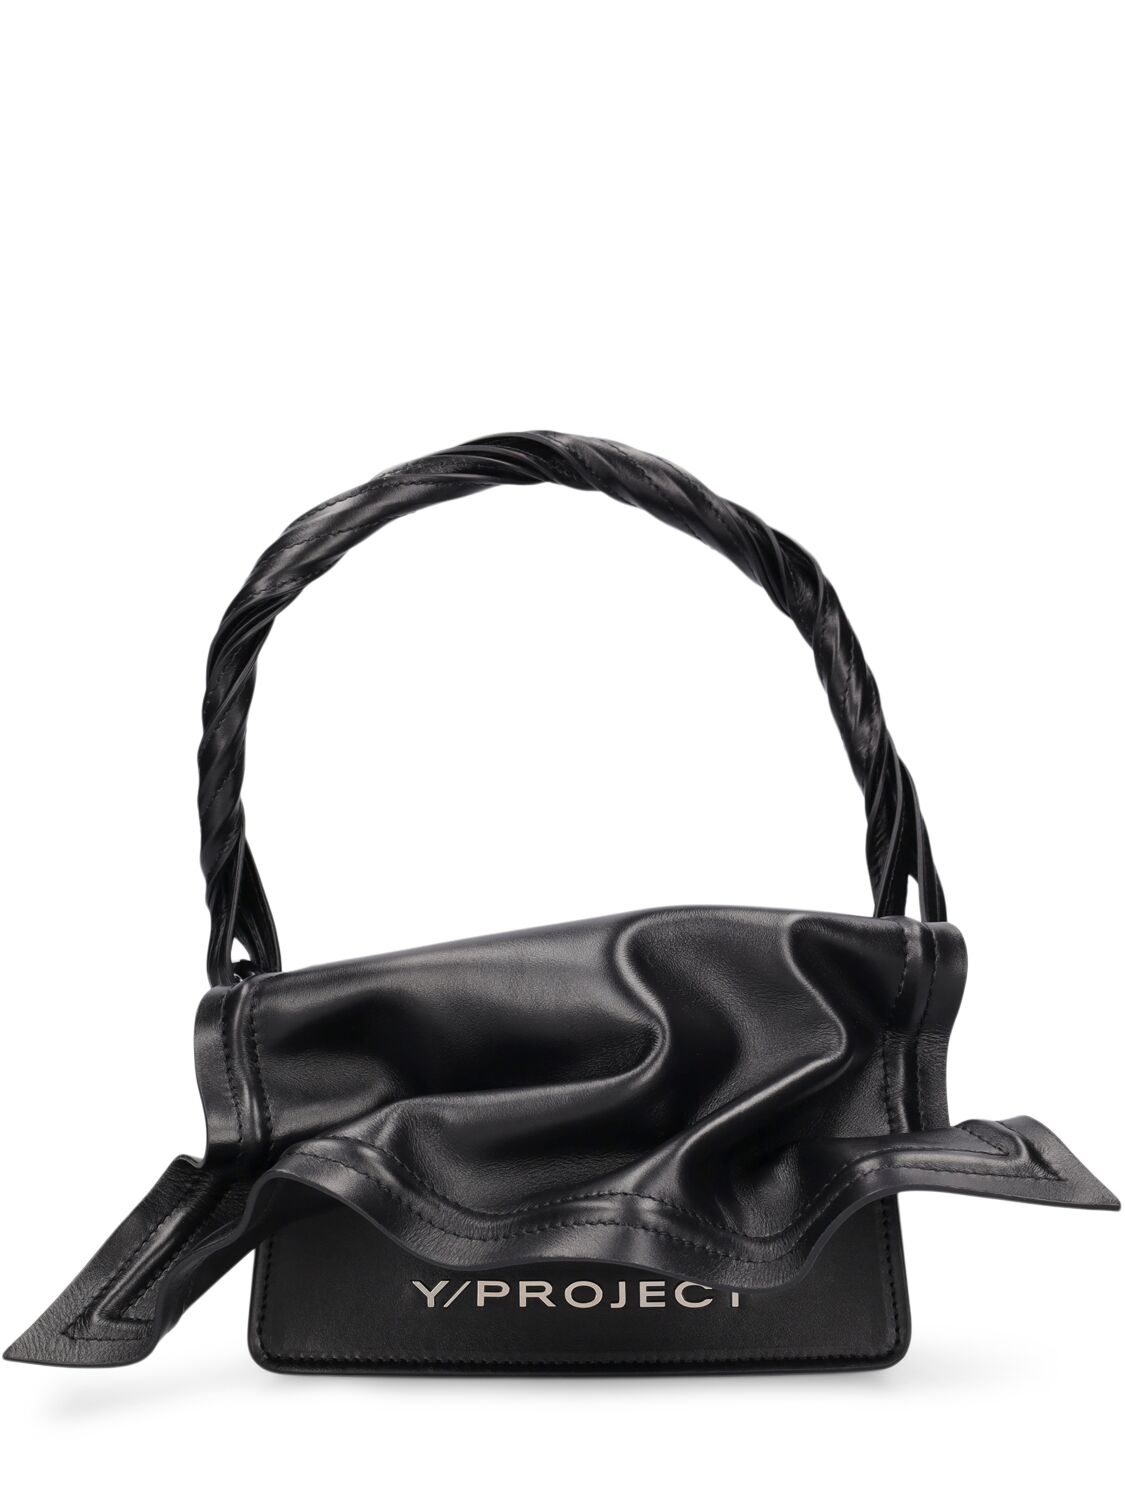 Y/project Mini Wire Leather Top Handle Bag In Black